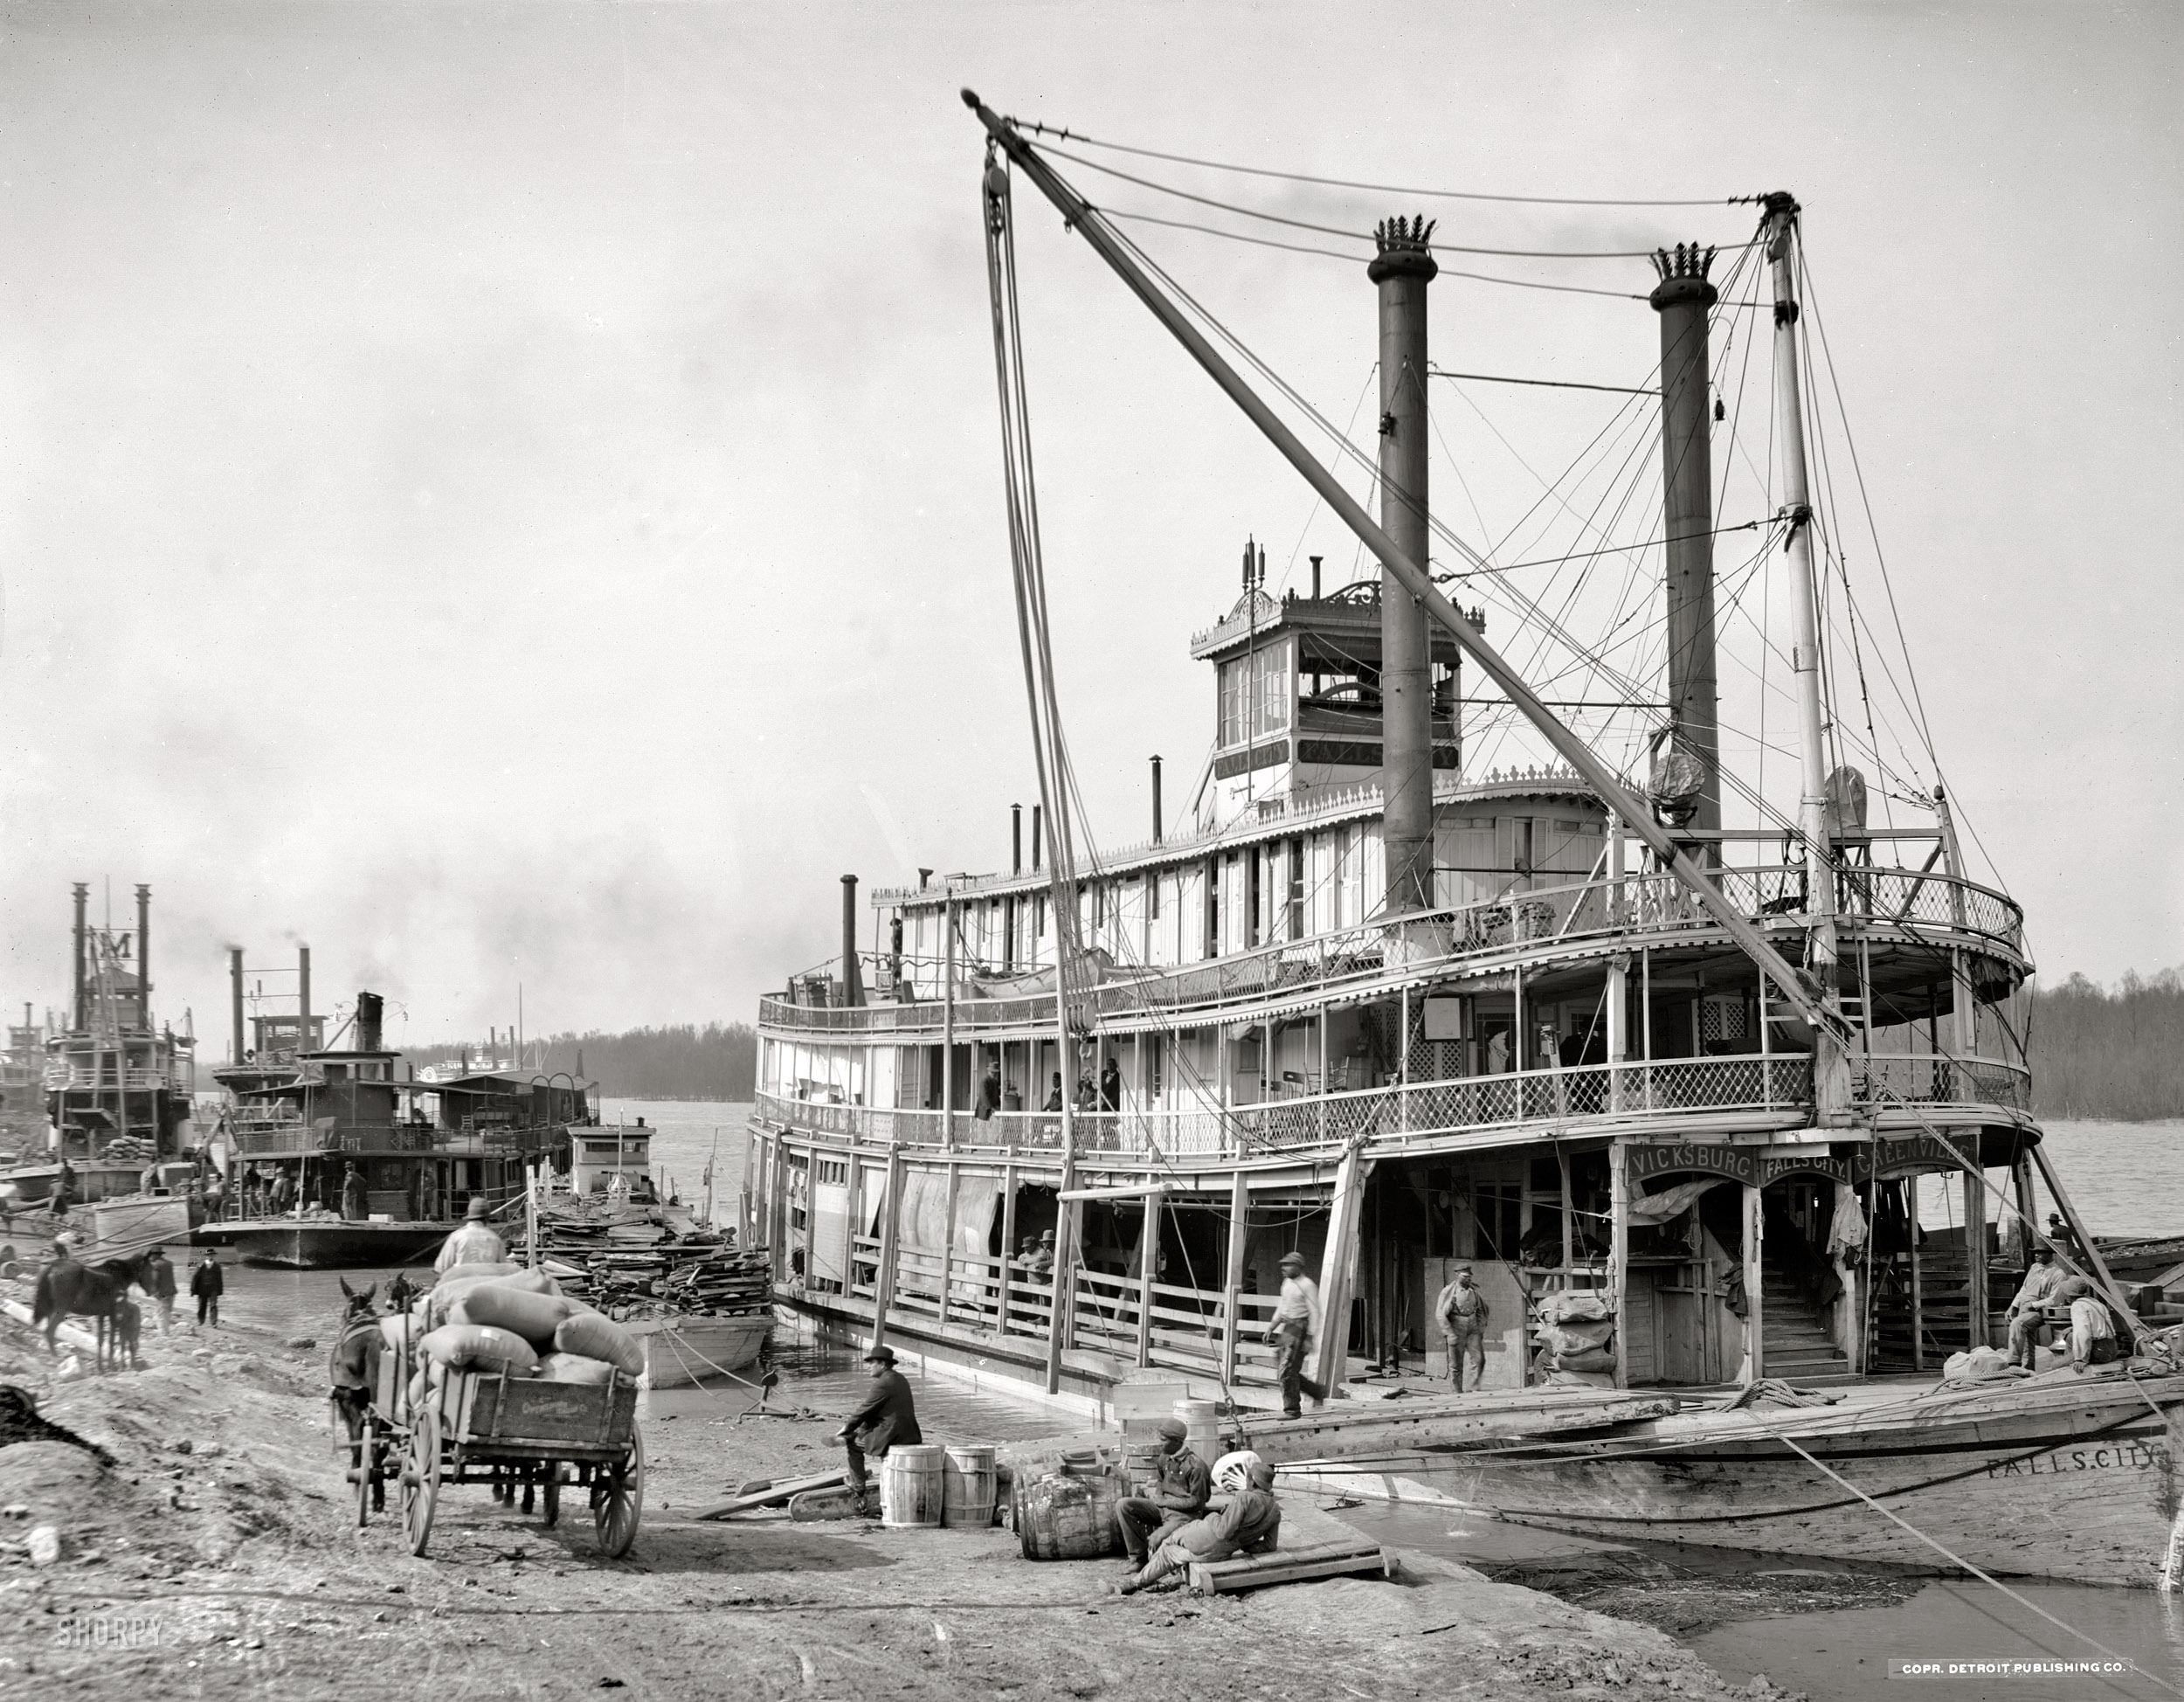 Vicksburg, Mississippi, circa 1900. "The levee." And the sternwheeler Falls City. Dry plate glass negative, Detroit Publishing Company. View full size.